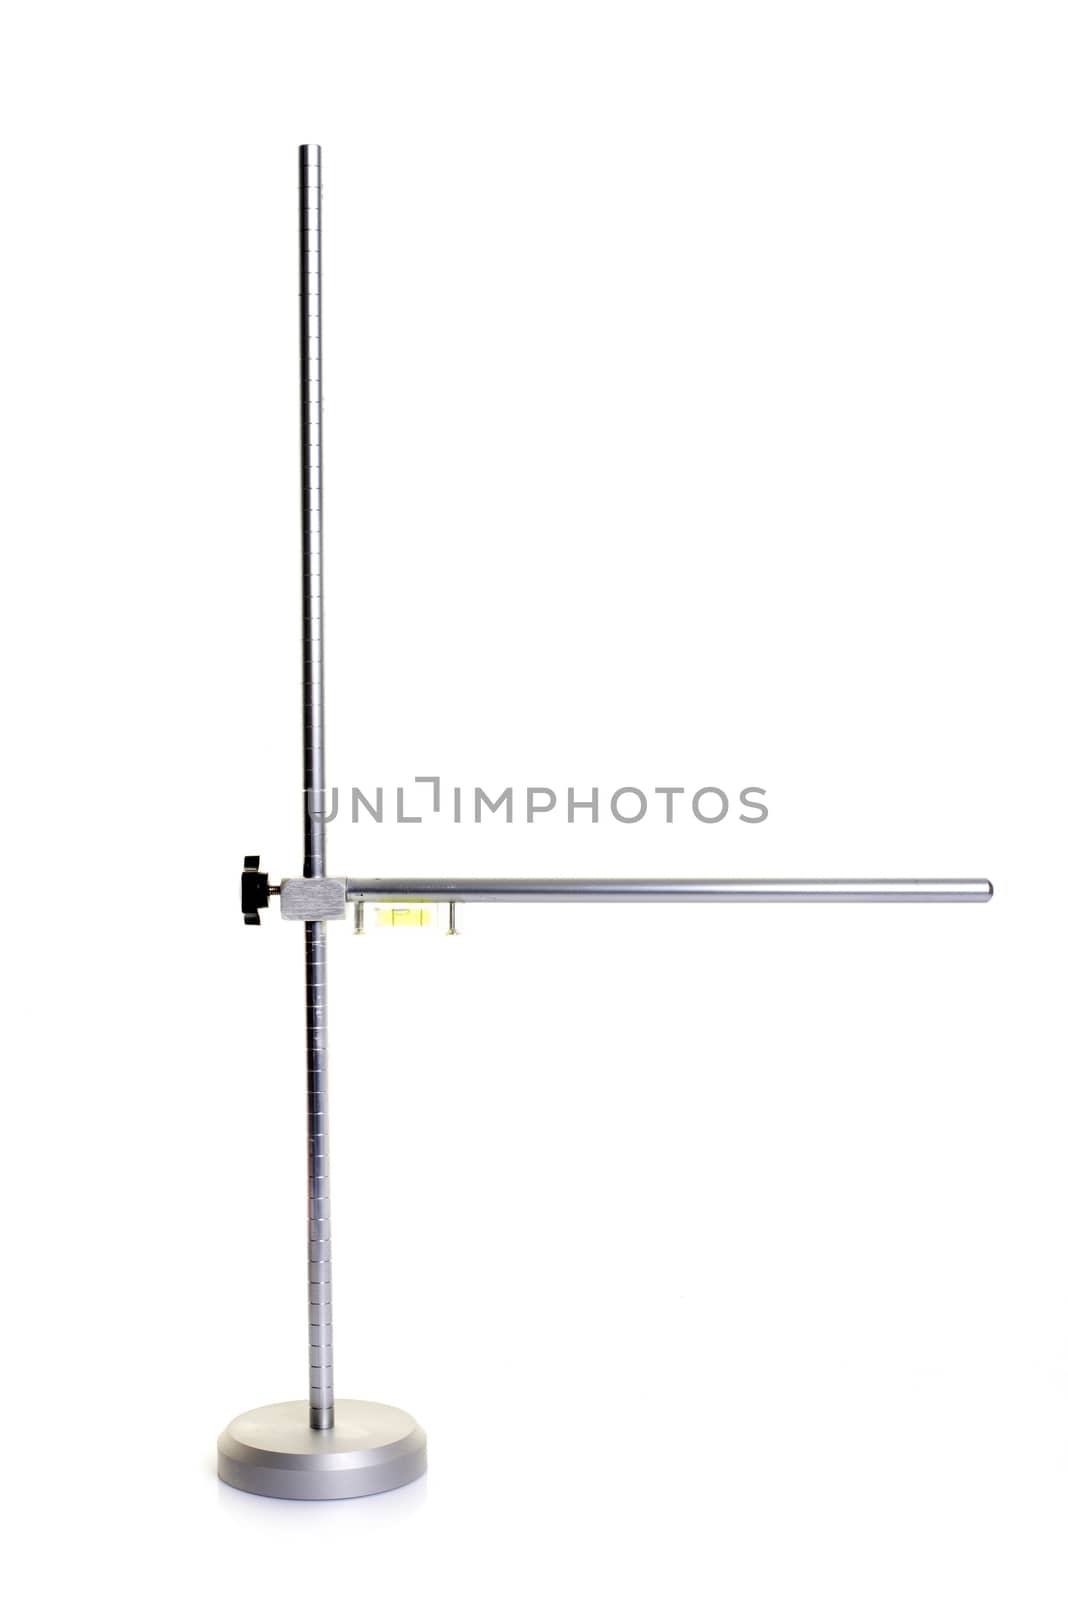 measuring rod for dog in front of white background